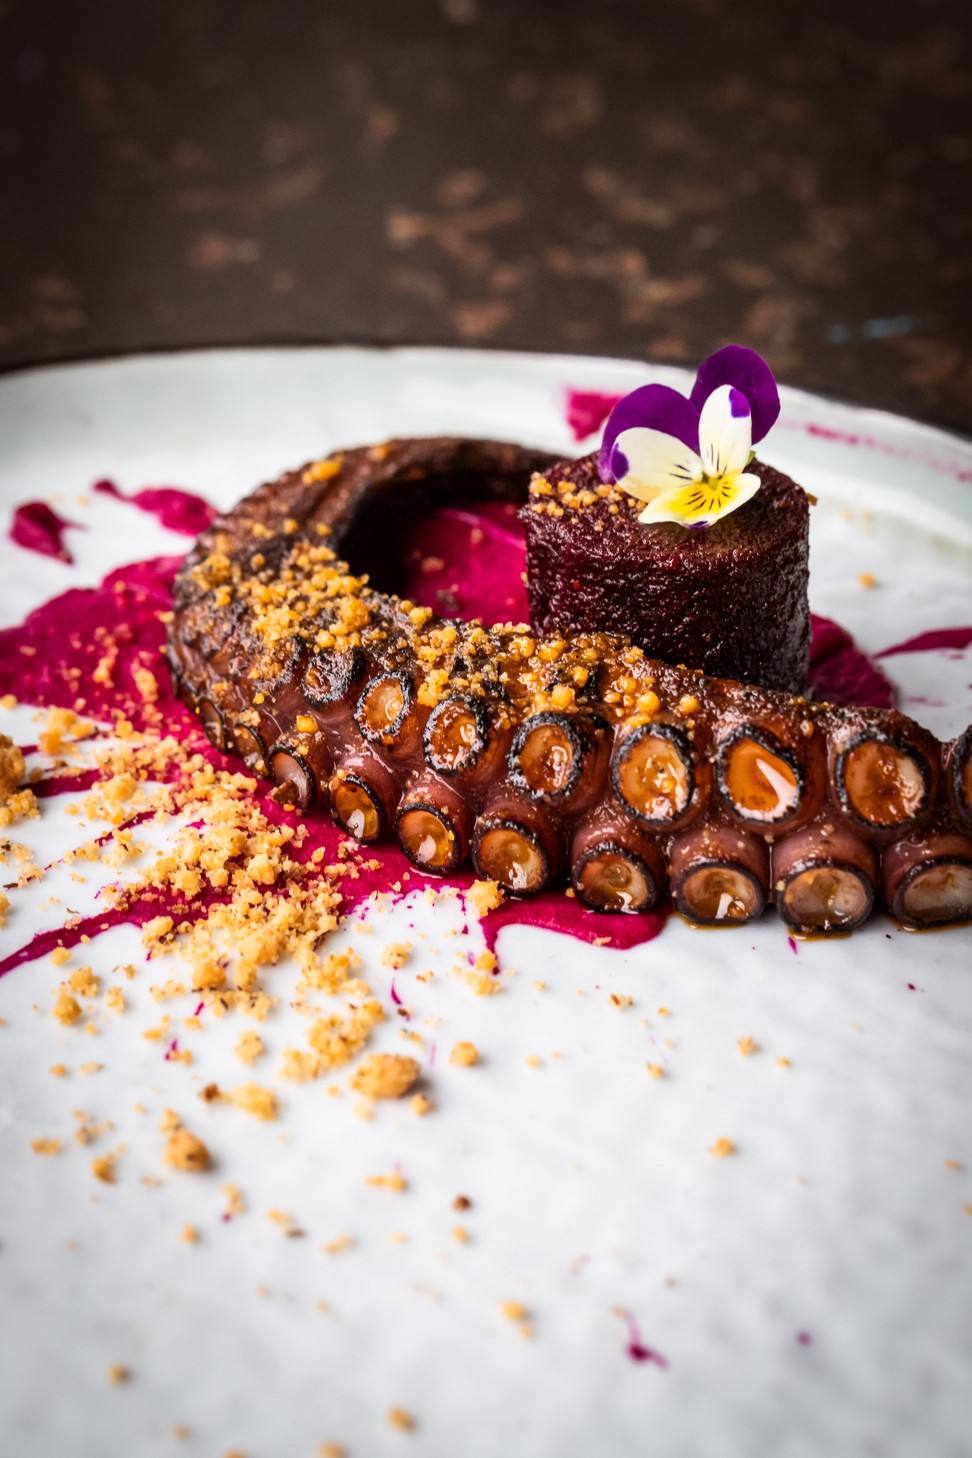 Chargrilled Spanish octopus with beetroot, smoked paprika and porcini crumble.